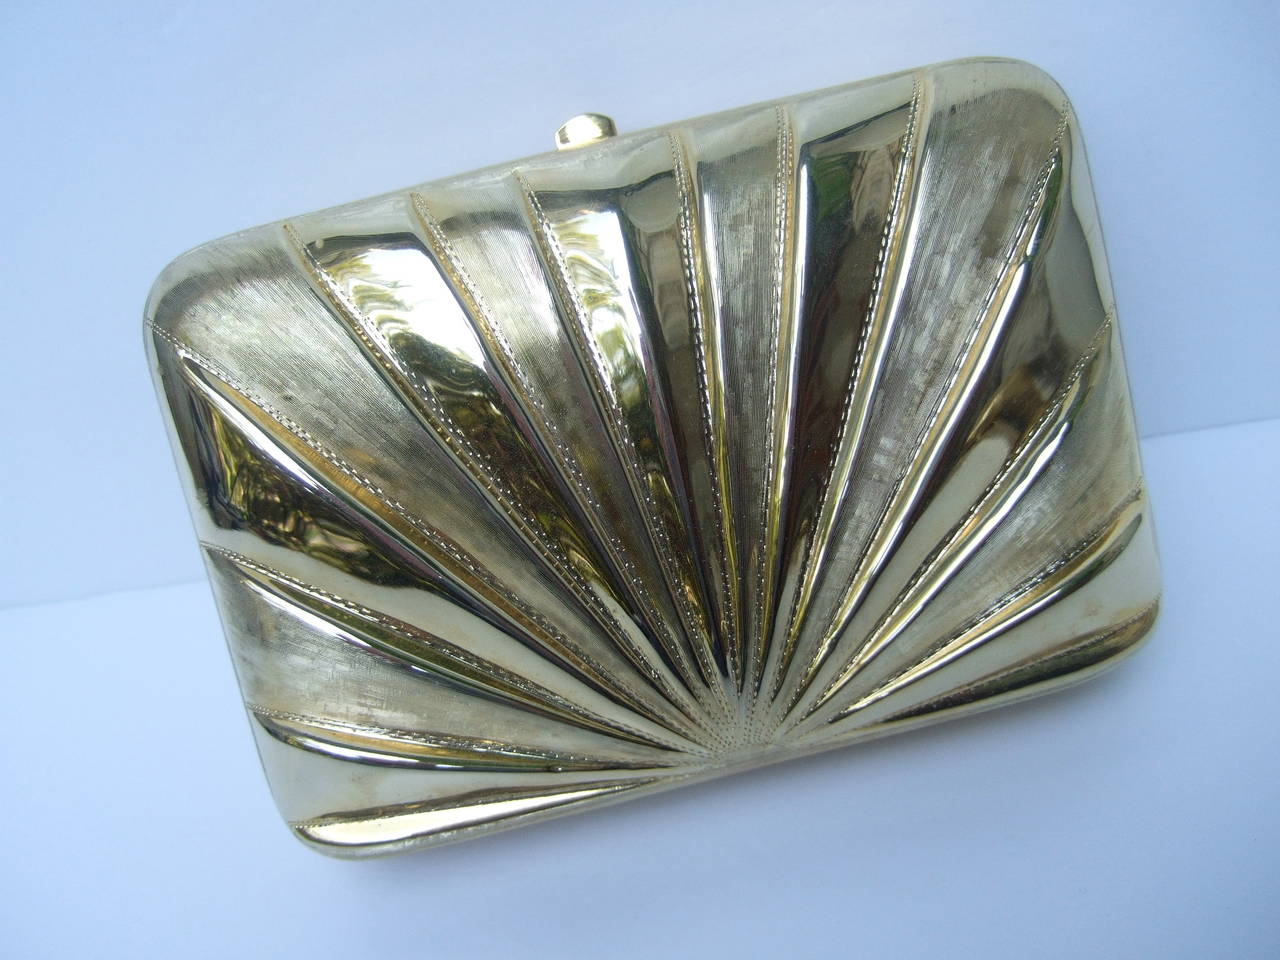 Women's Reserved Saks Fifth Avenue Gilt Metal Evening Bag Made in Italy c 1980